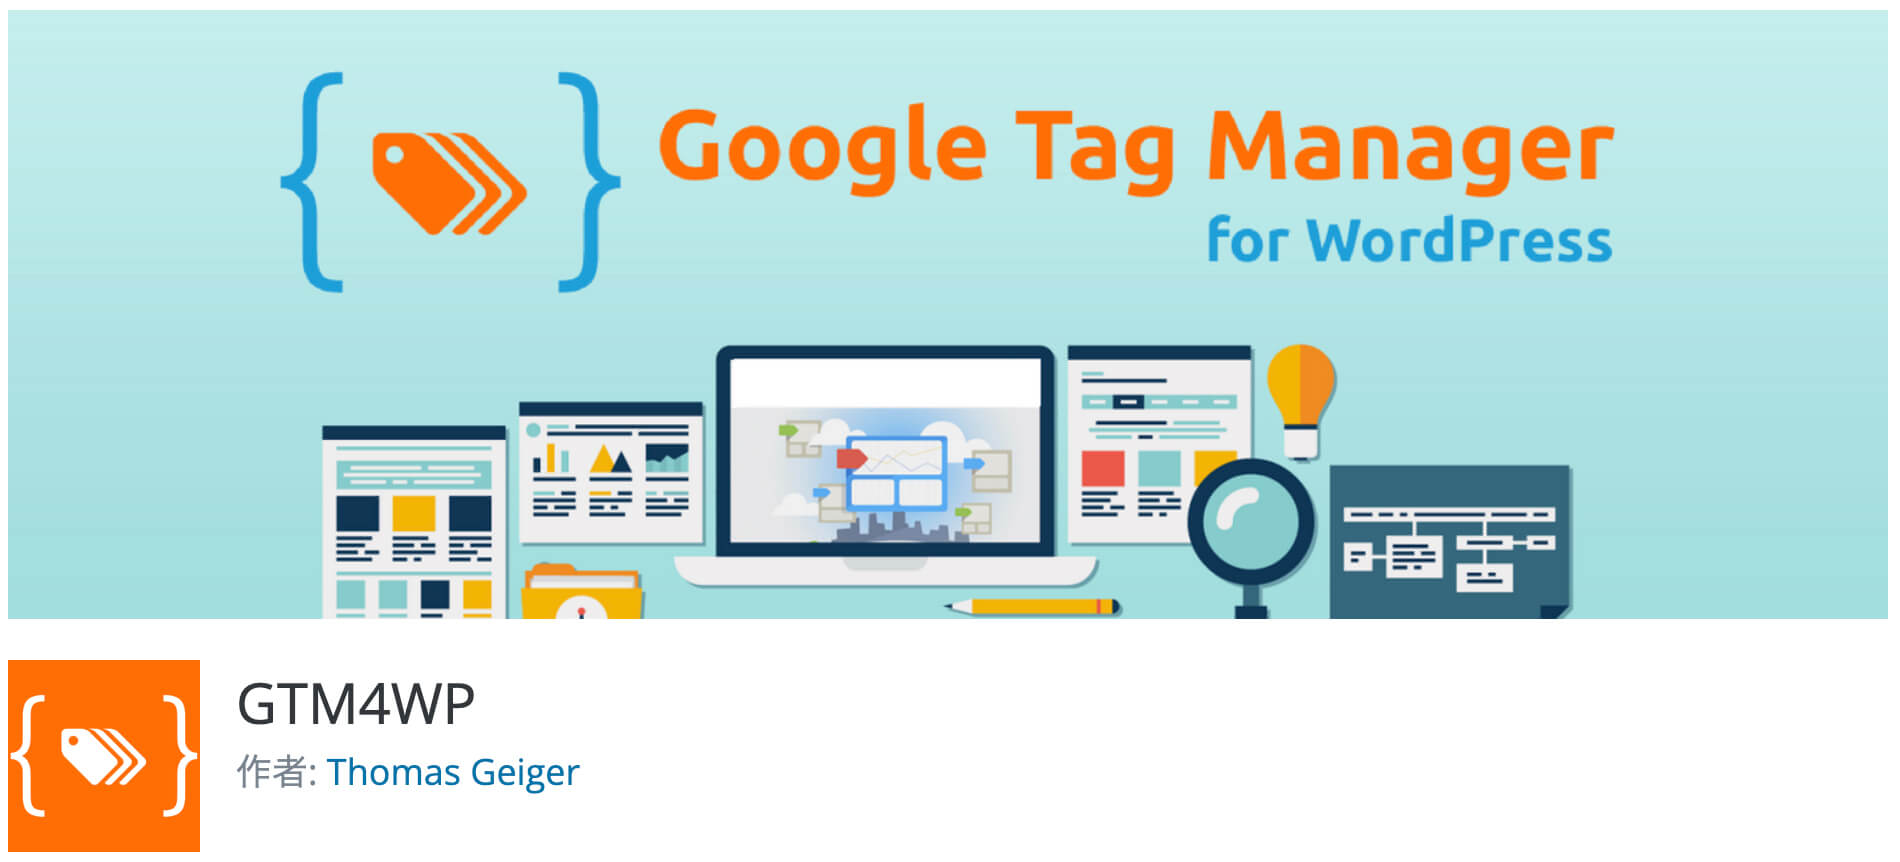 Google Tag Manager for WordPress